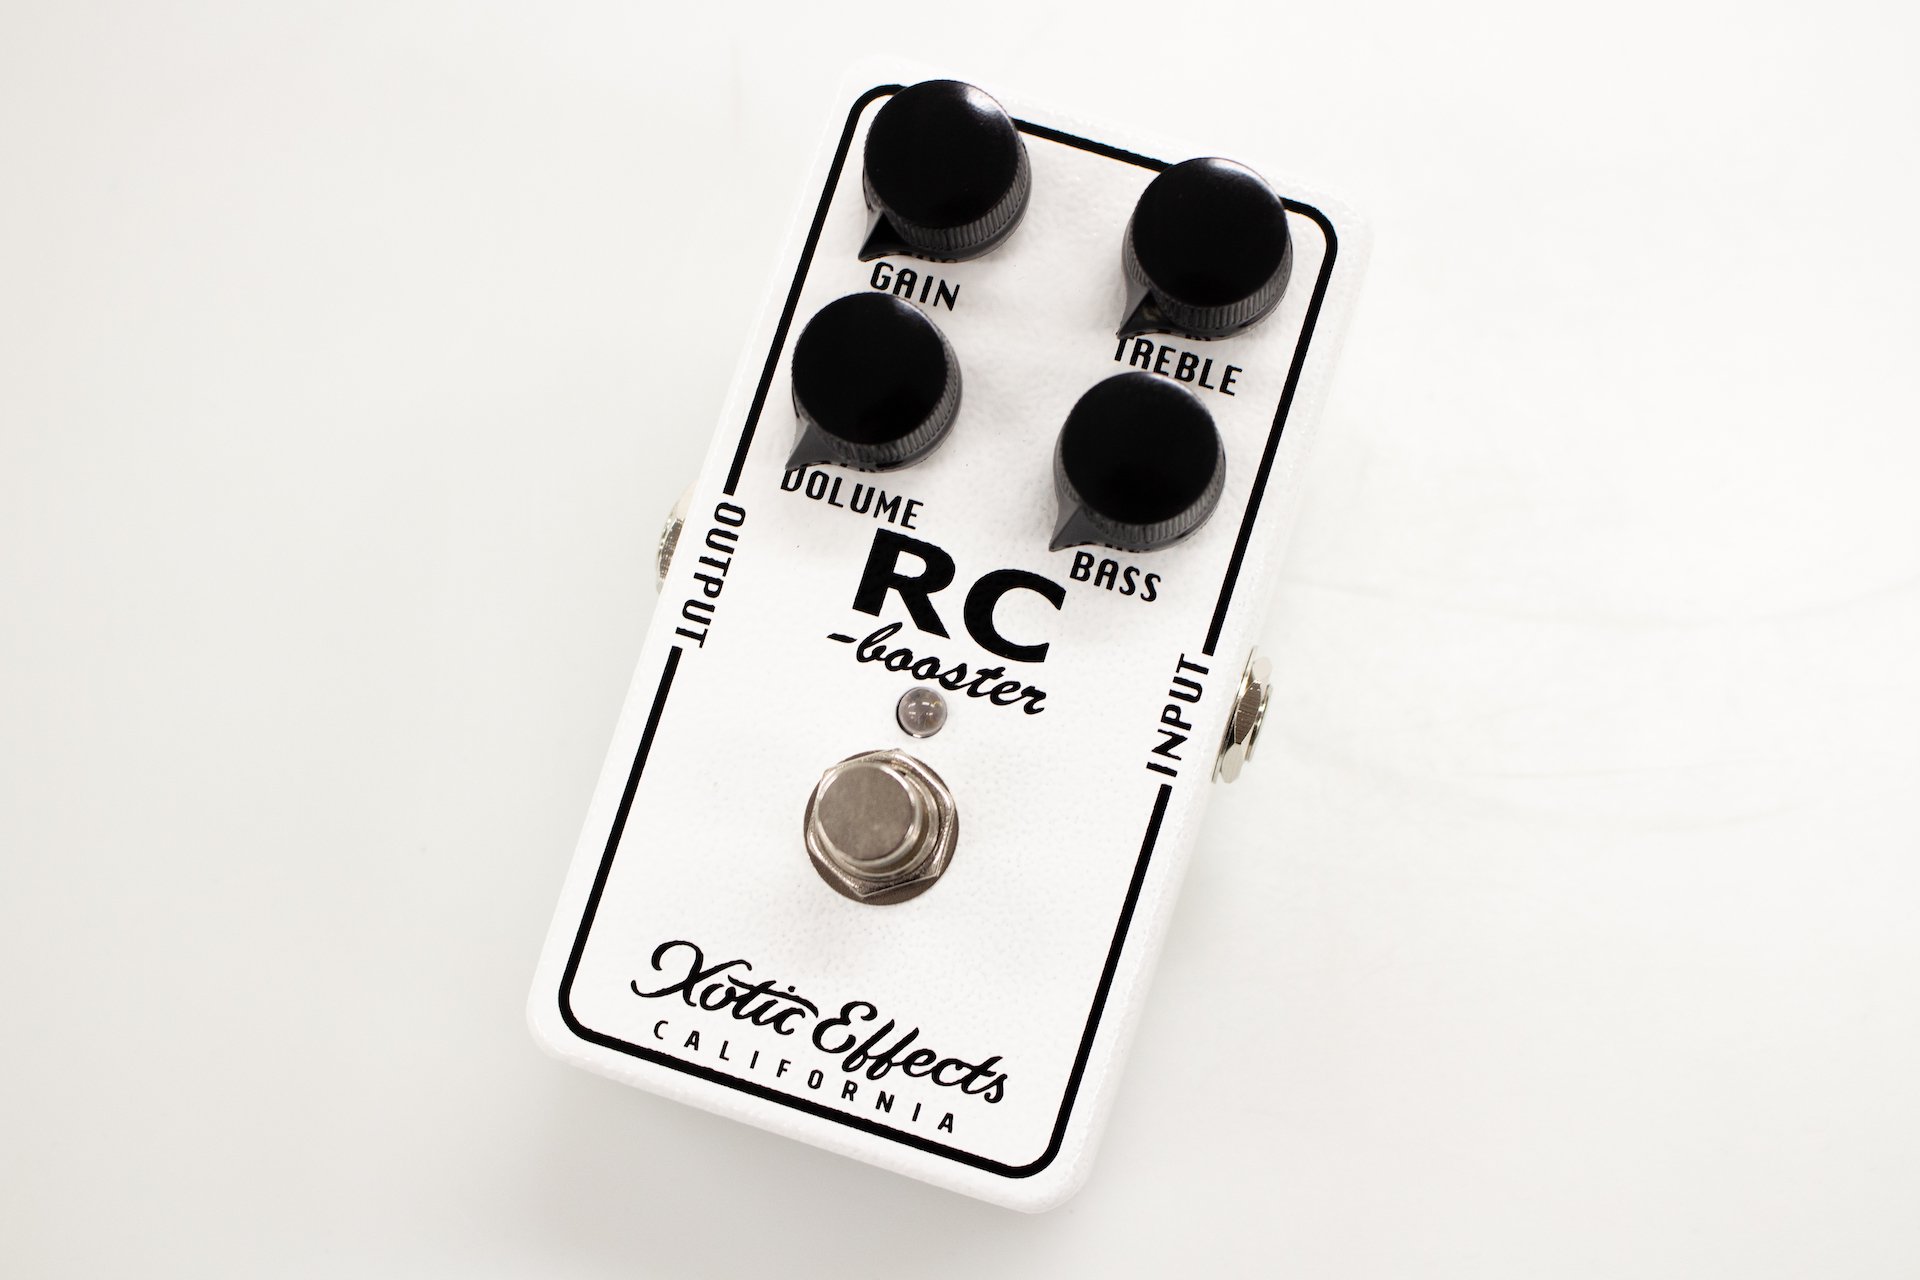 xotic RC bass booster